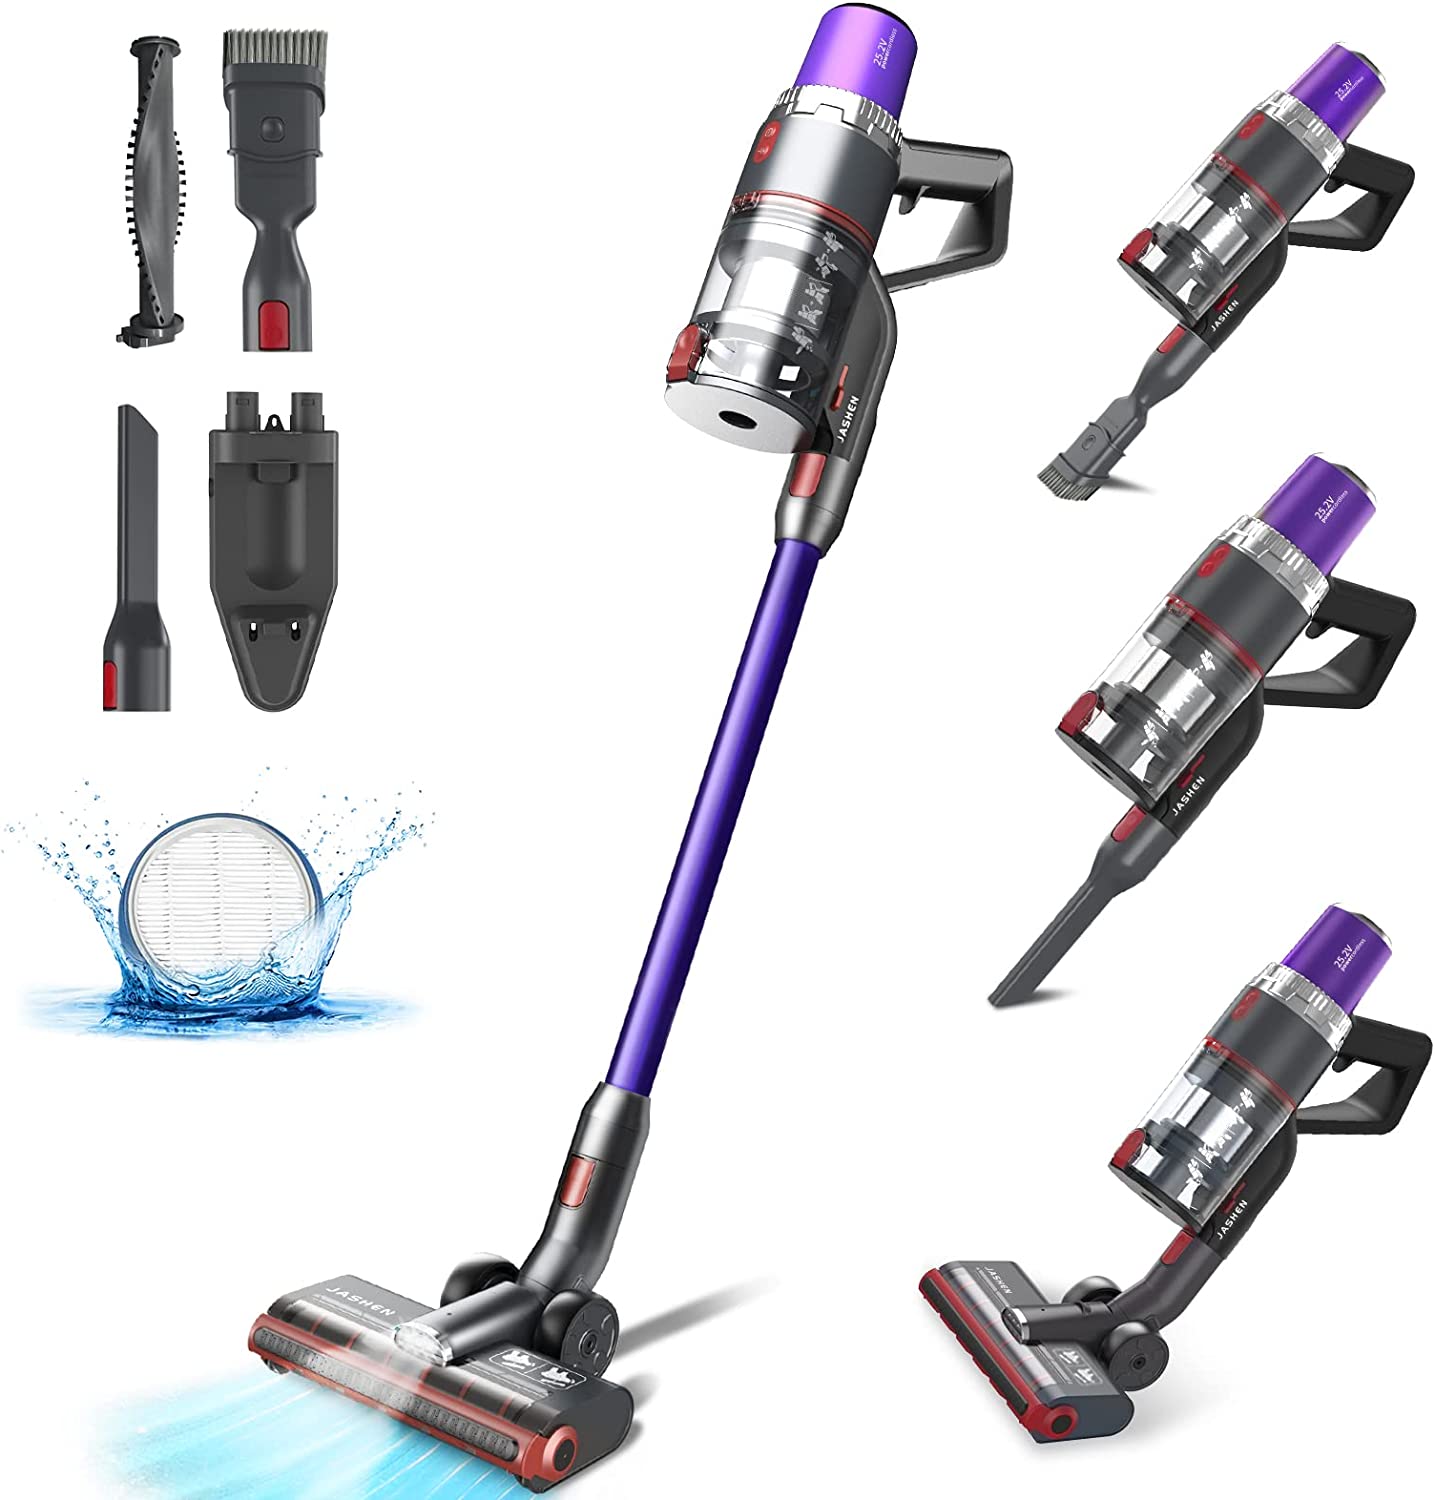 Cordless Vacuum Cleaner,Stick Vacuum Cleaner 250W 6 in 1 for Hard Floor Carpet Pet Hair, Vacuum Cleaner Wireless Portable with 2000mAh Battery, HEPA Filter & Led Display